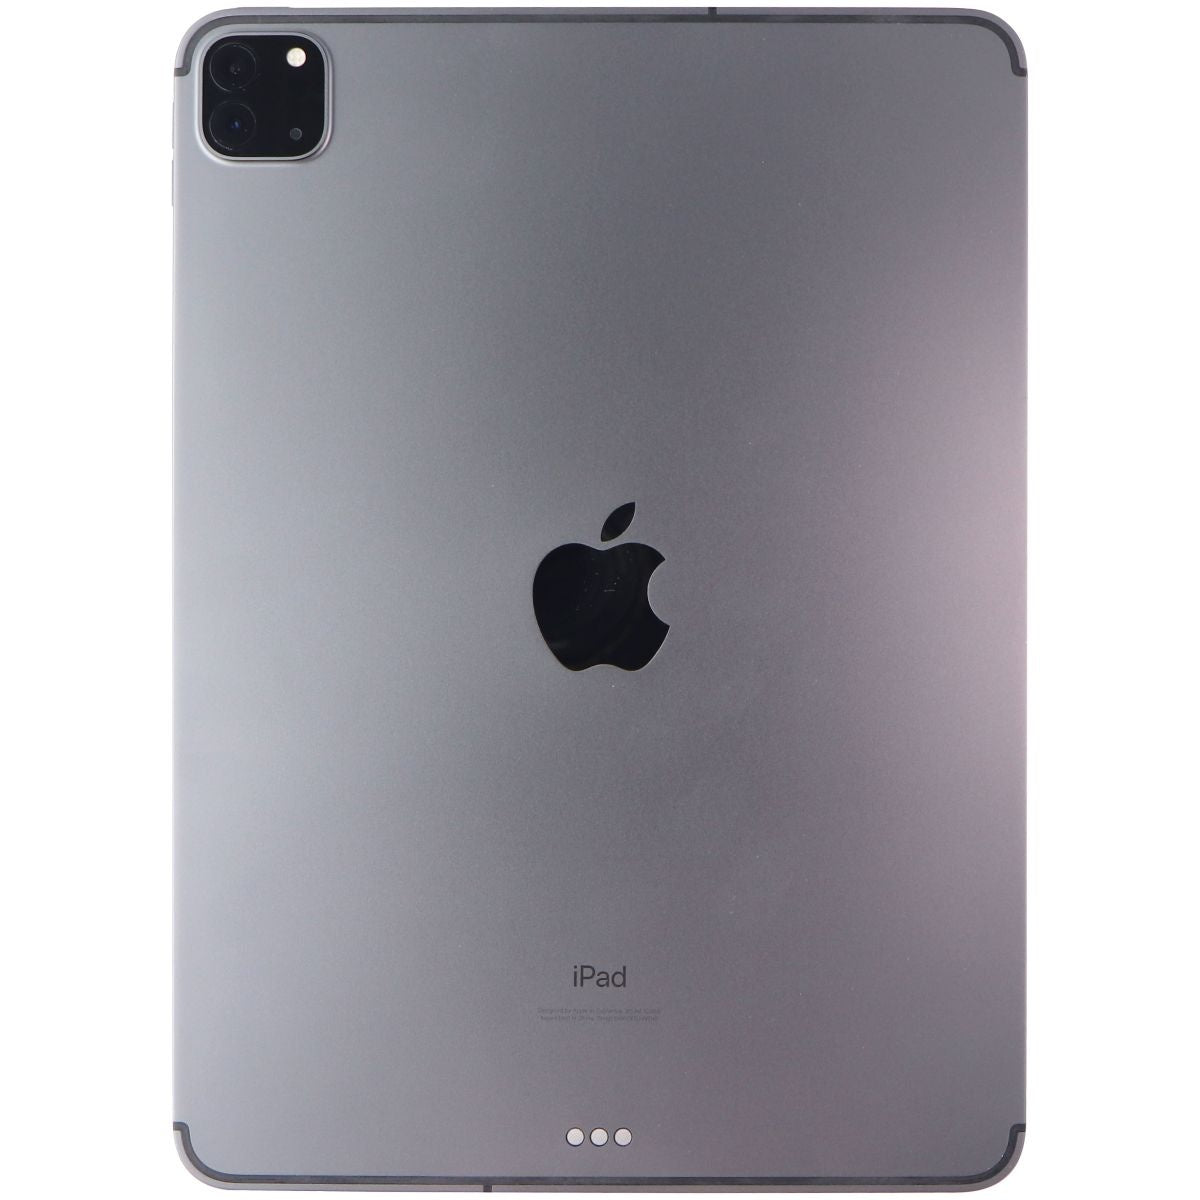 Apple iPad Pro (11-inch) 2nd Gen Tablet (A2068) Unlocked - 128GB/Space Gray iPads, Tablets & eBook Readers Apple    - Simple Cell Bulk Wholesale Pricing - USA Seller